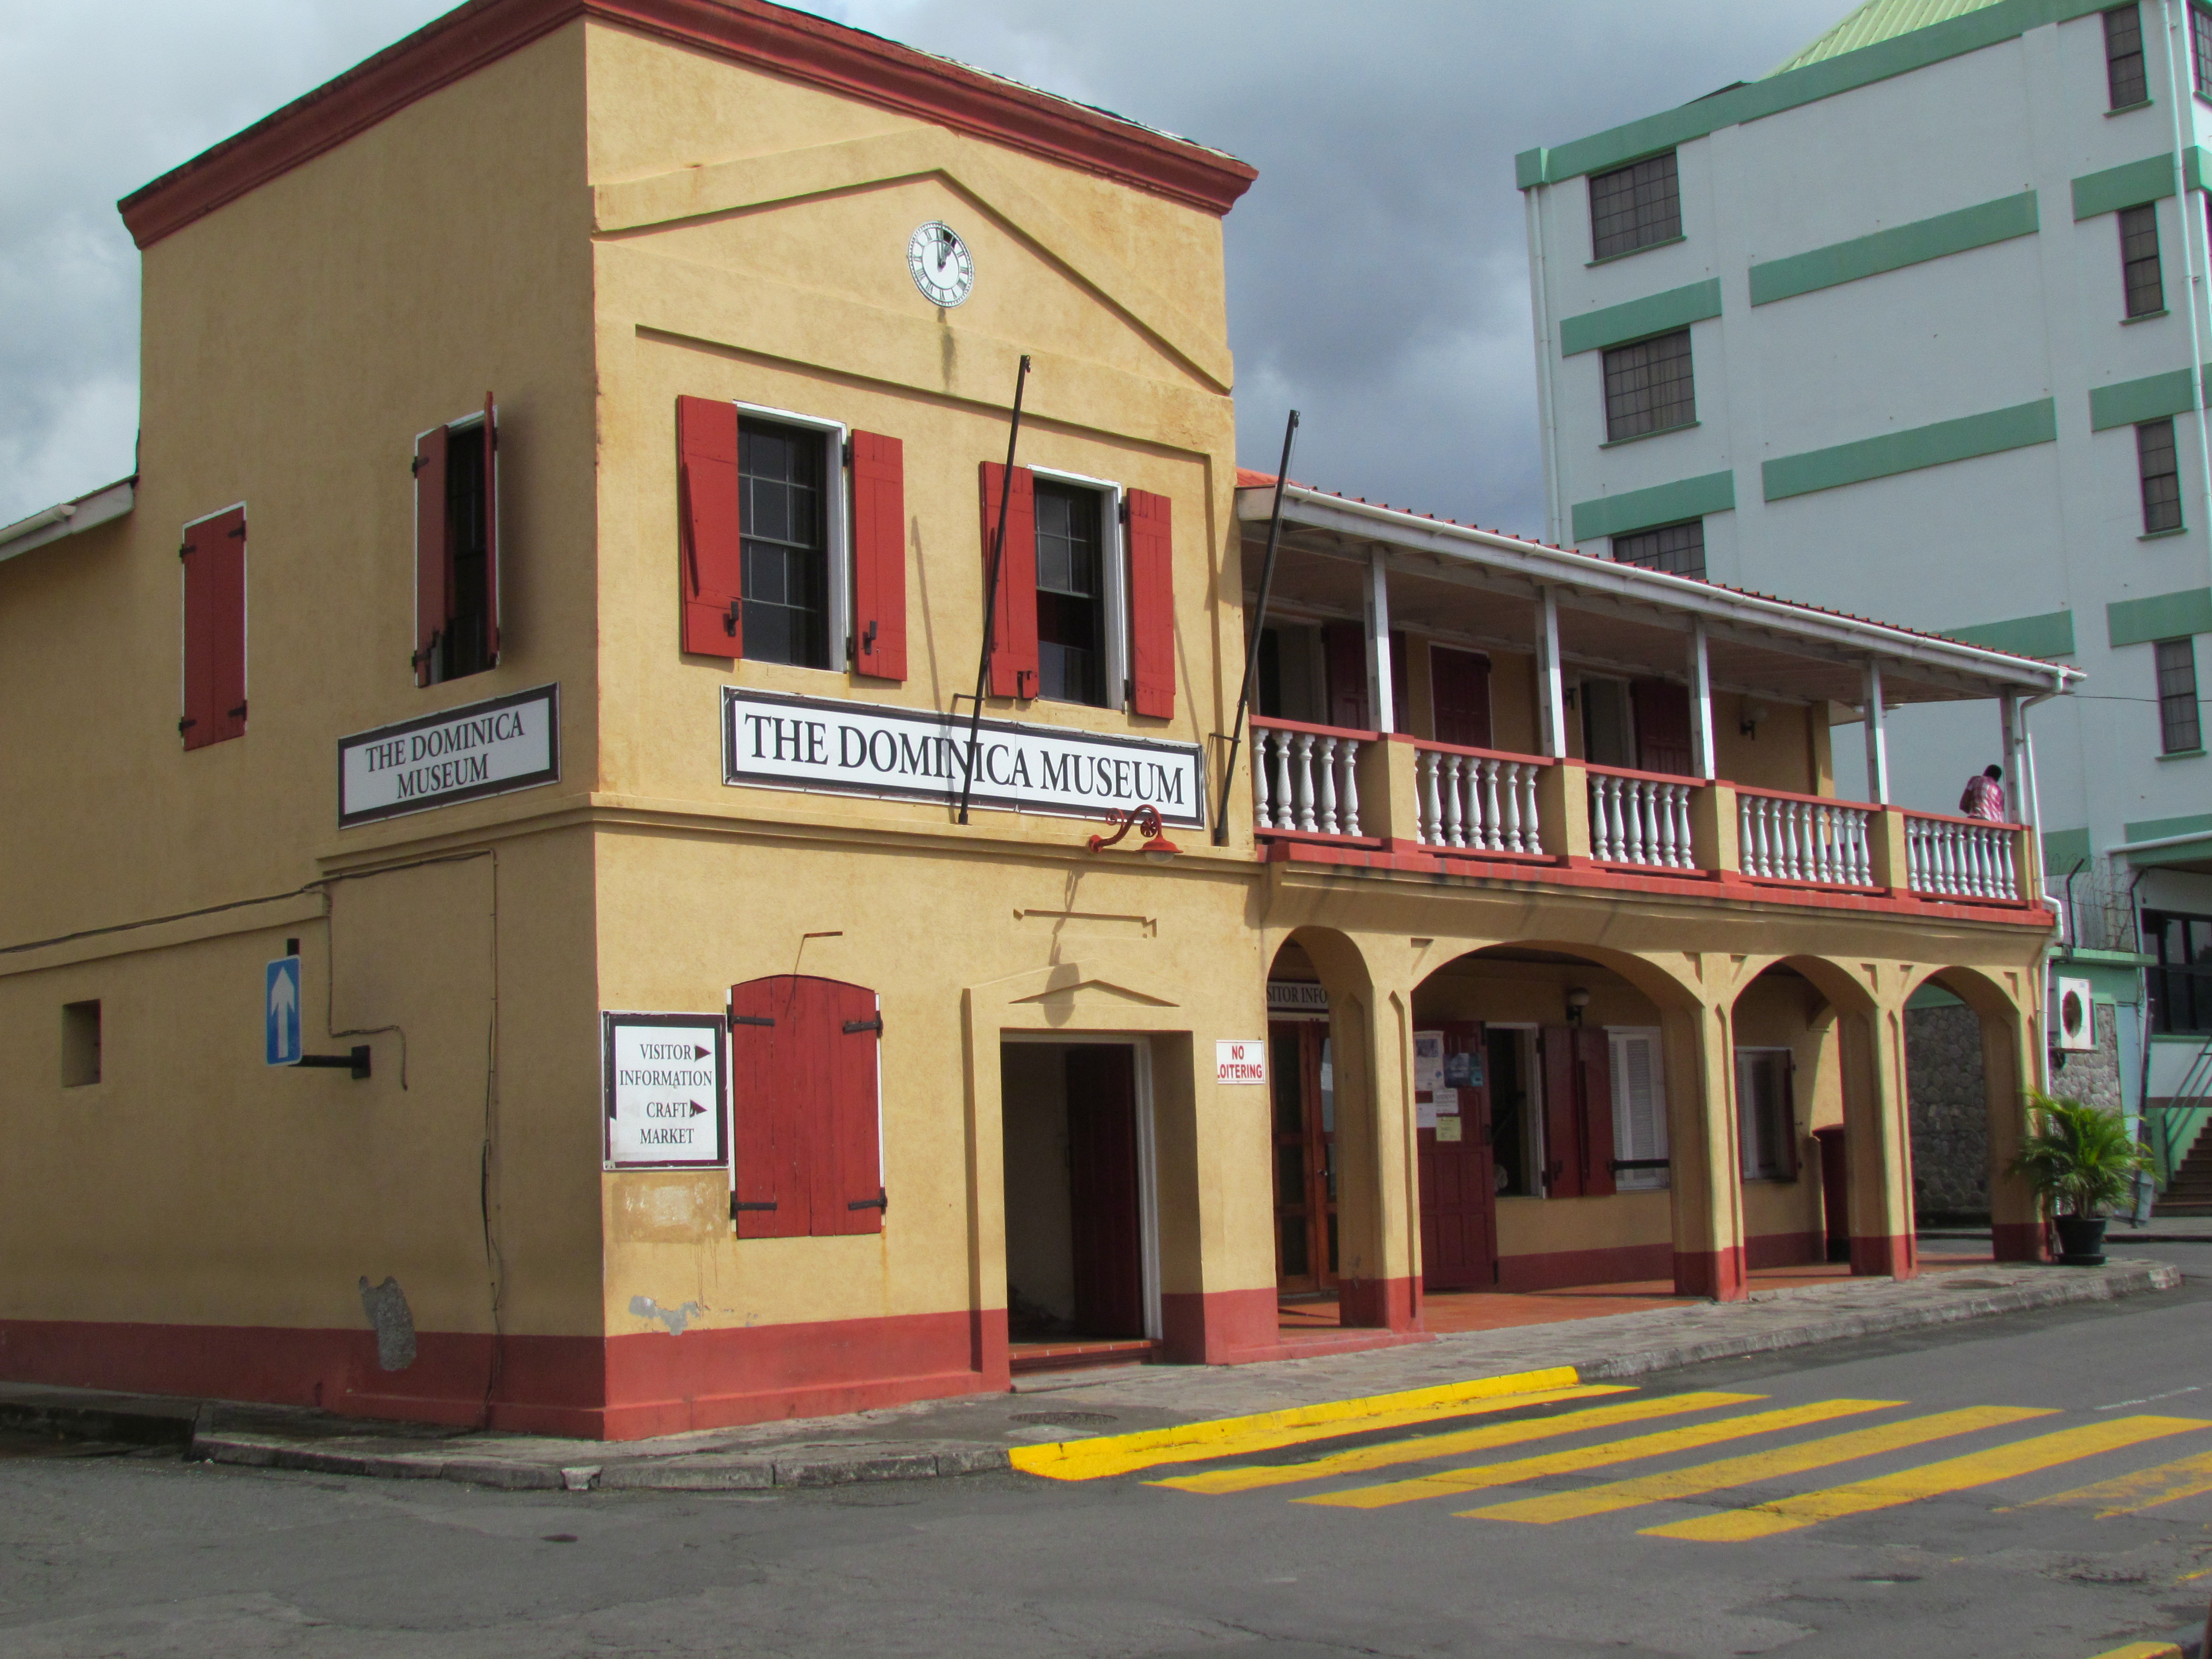 The Dominica Museum in Dominica, Caribbean | Museums - Rated 0.8